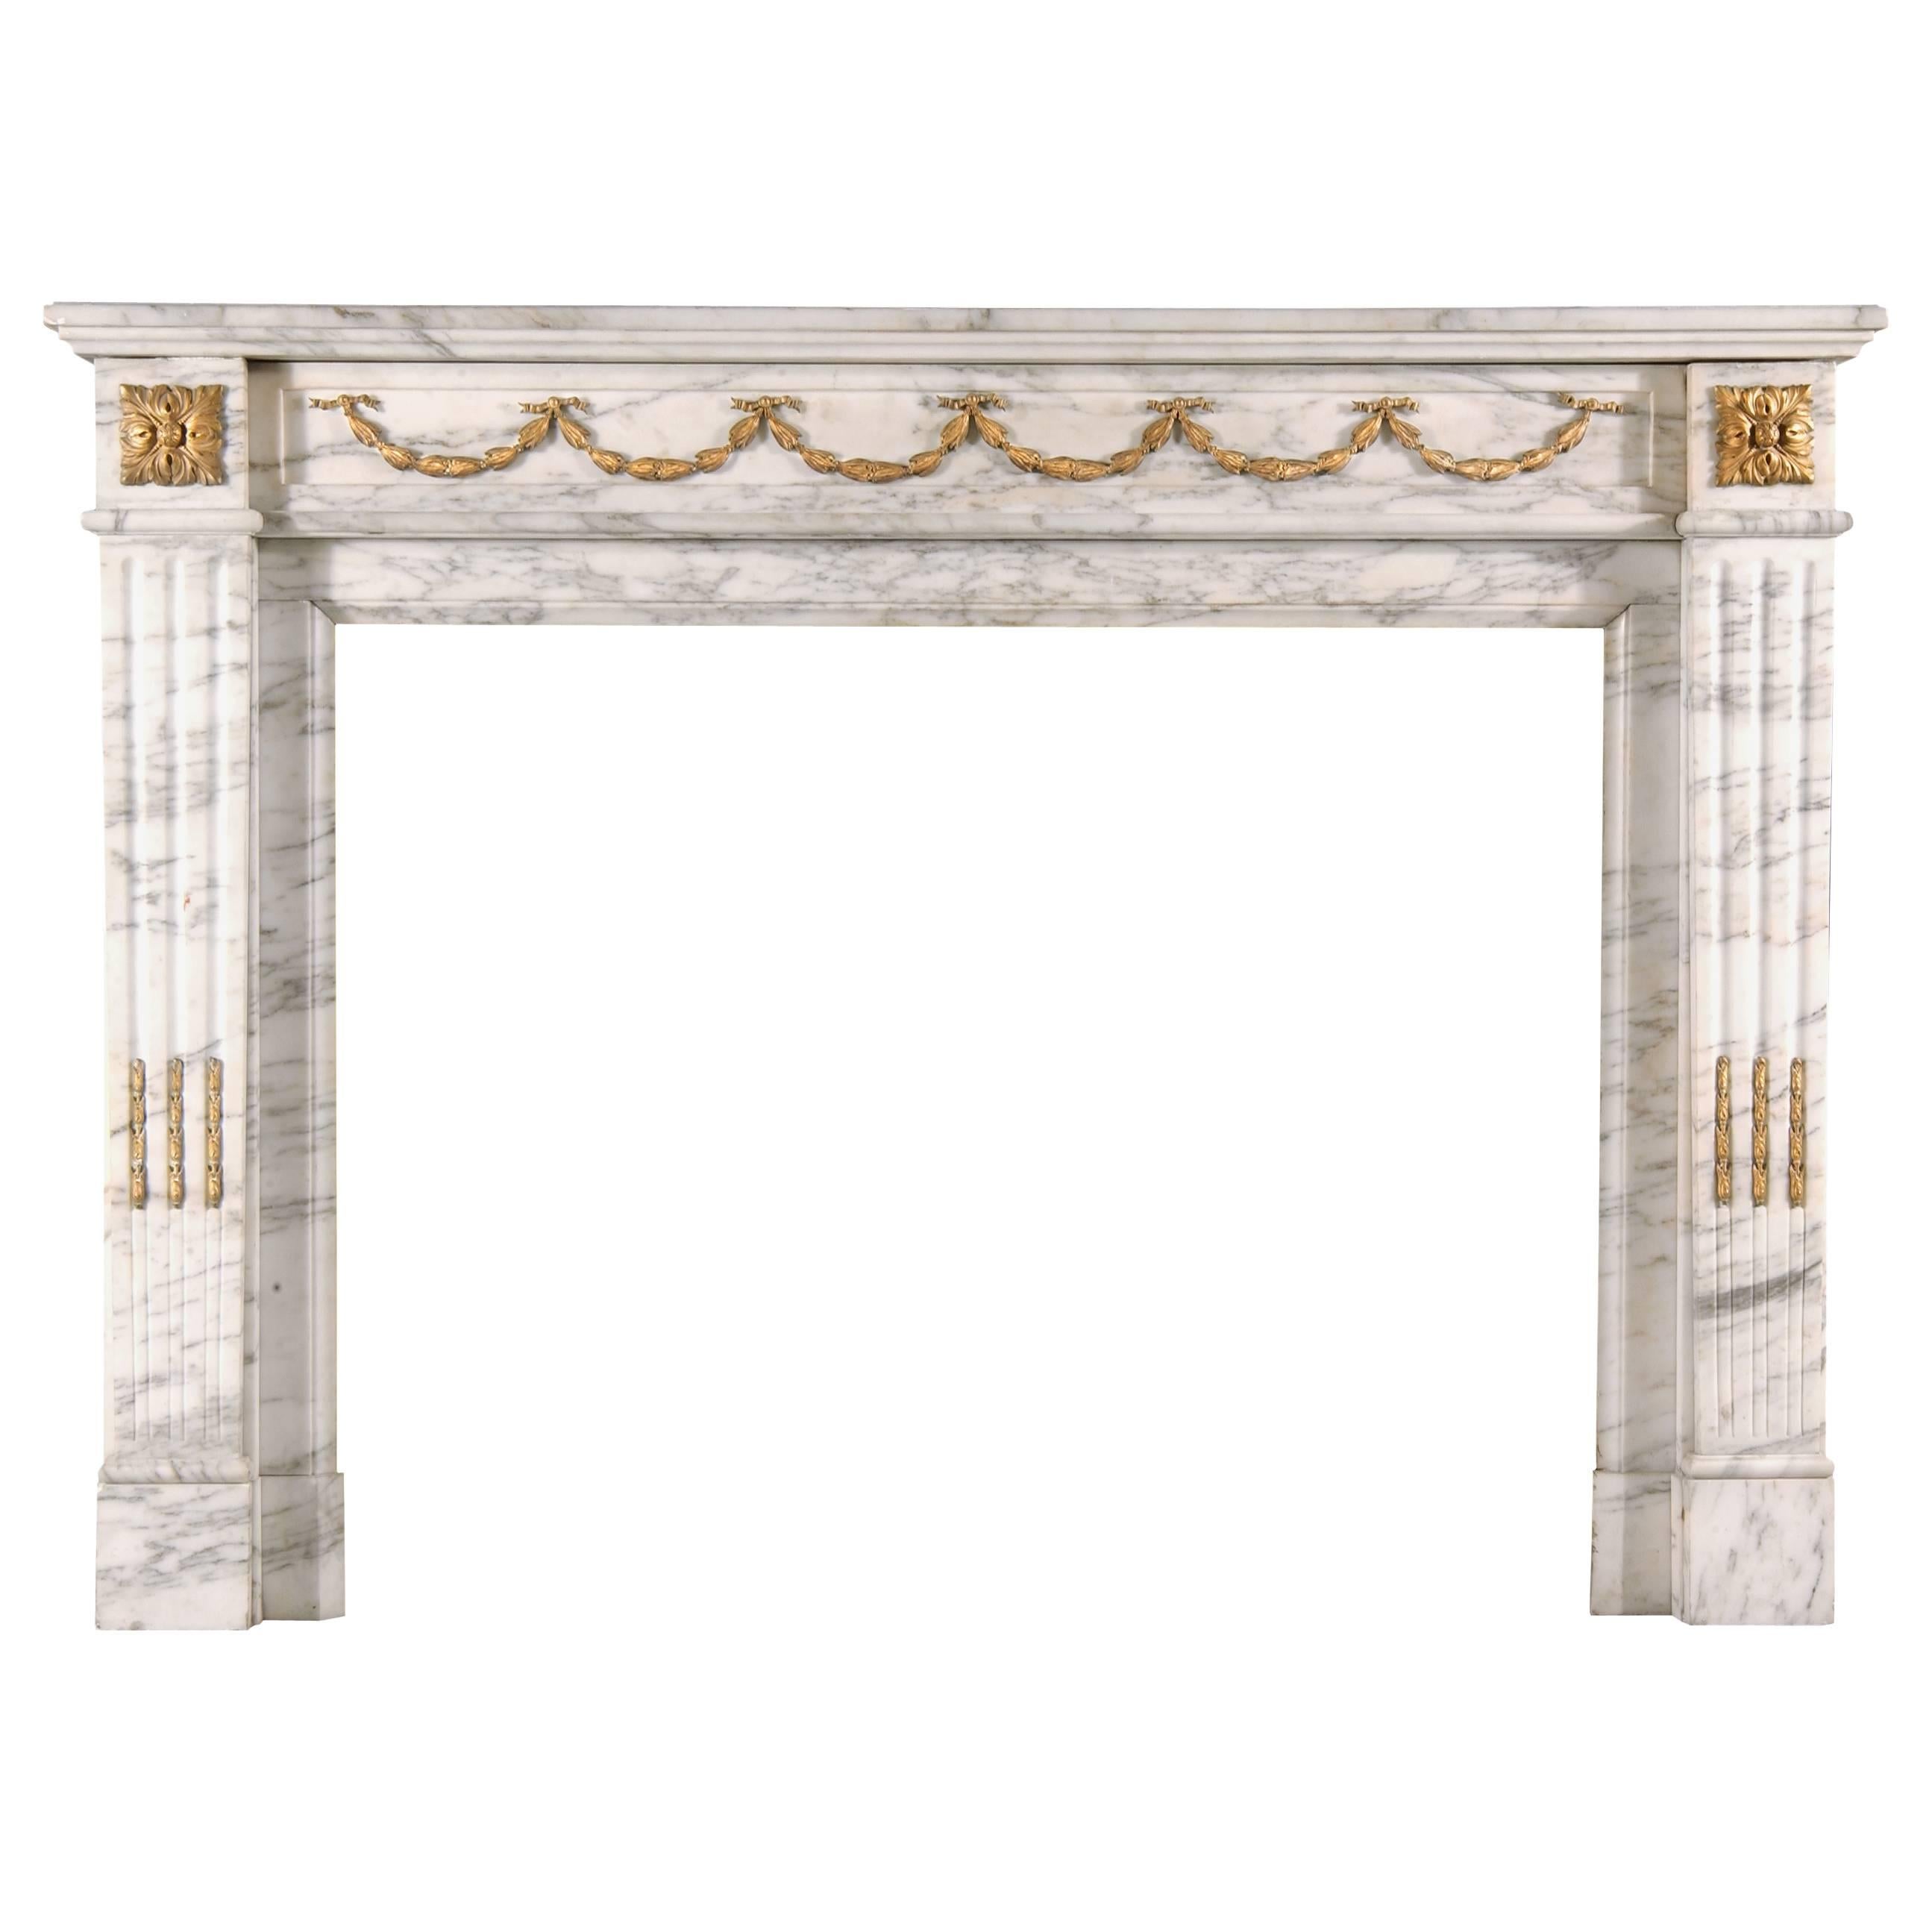 19th Century French Statuary Marble and Gilt Ormolu Antique Fireplace Mantel